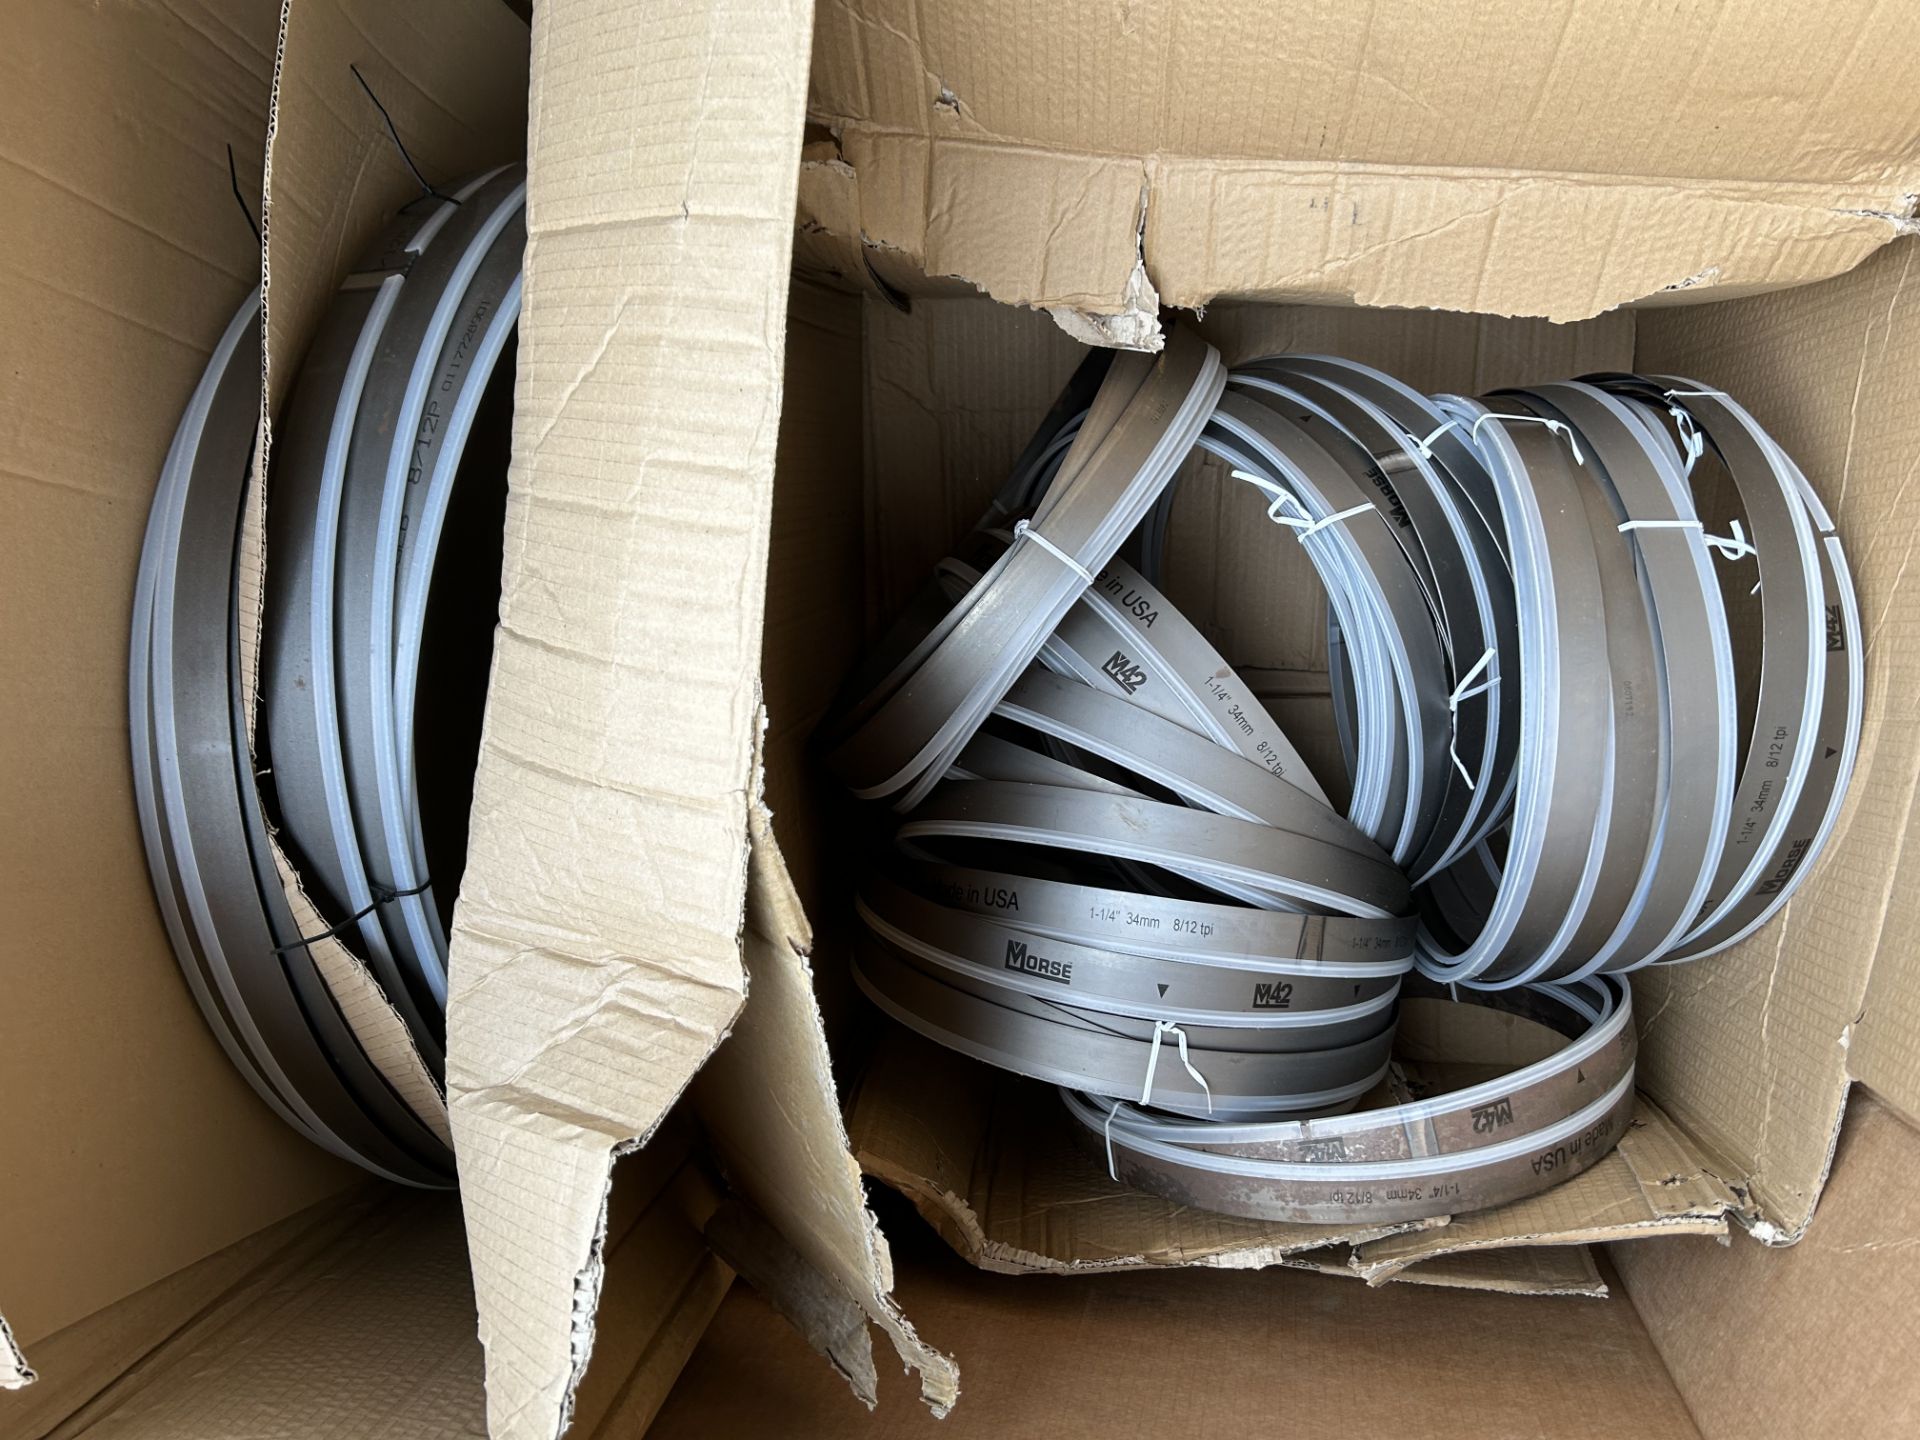 57 PACKS OF 3x STARRETT AND MORSE BAND SAW BLADES - 171x BANDSAW BLADES TOTAL - Image 3 of 3